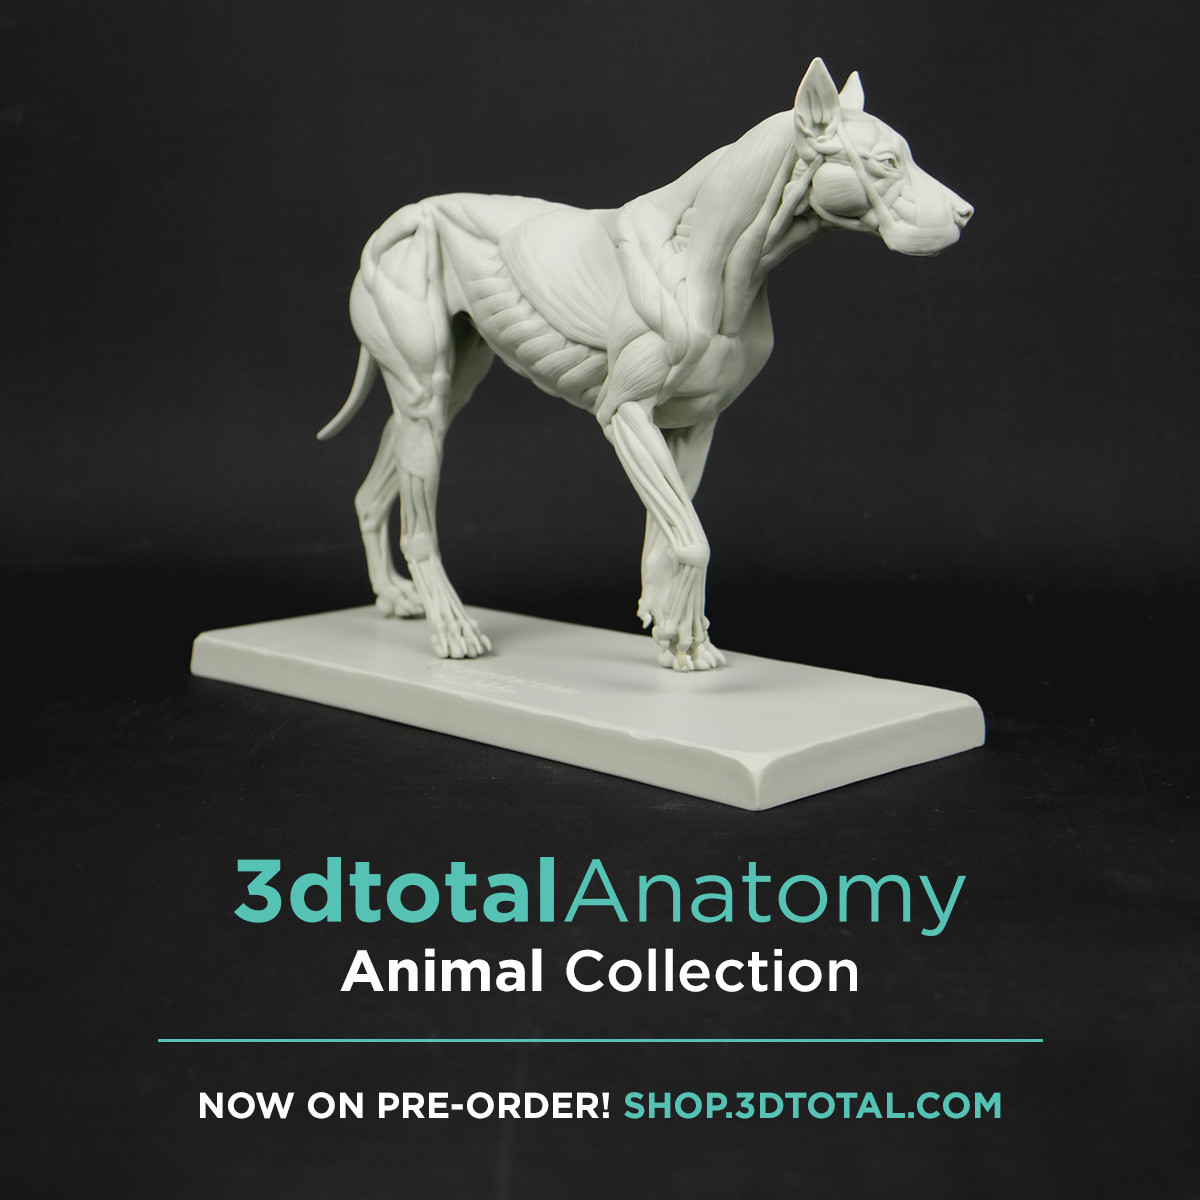 If you want to order the Canine ecorche :
https://shop.3dtotal.com/3dtotal-anatomy-canine-figure.html